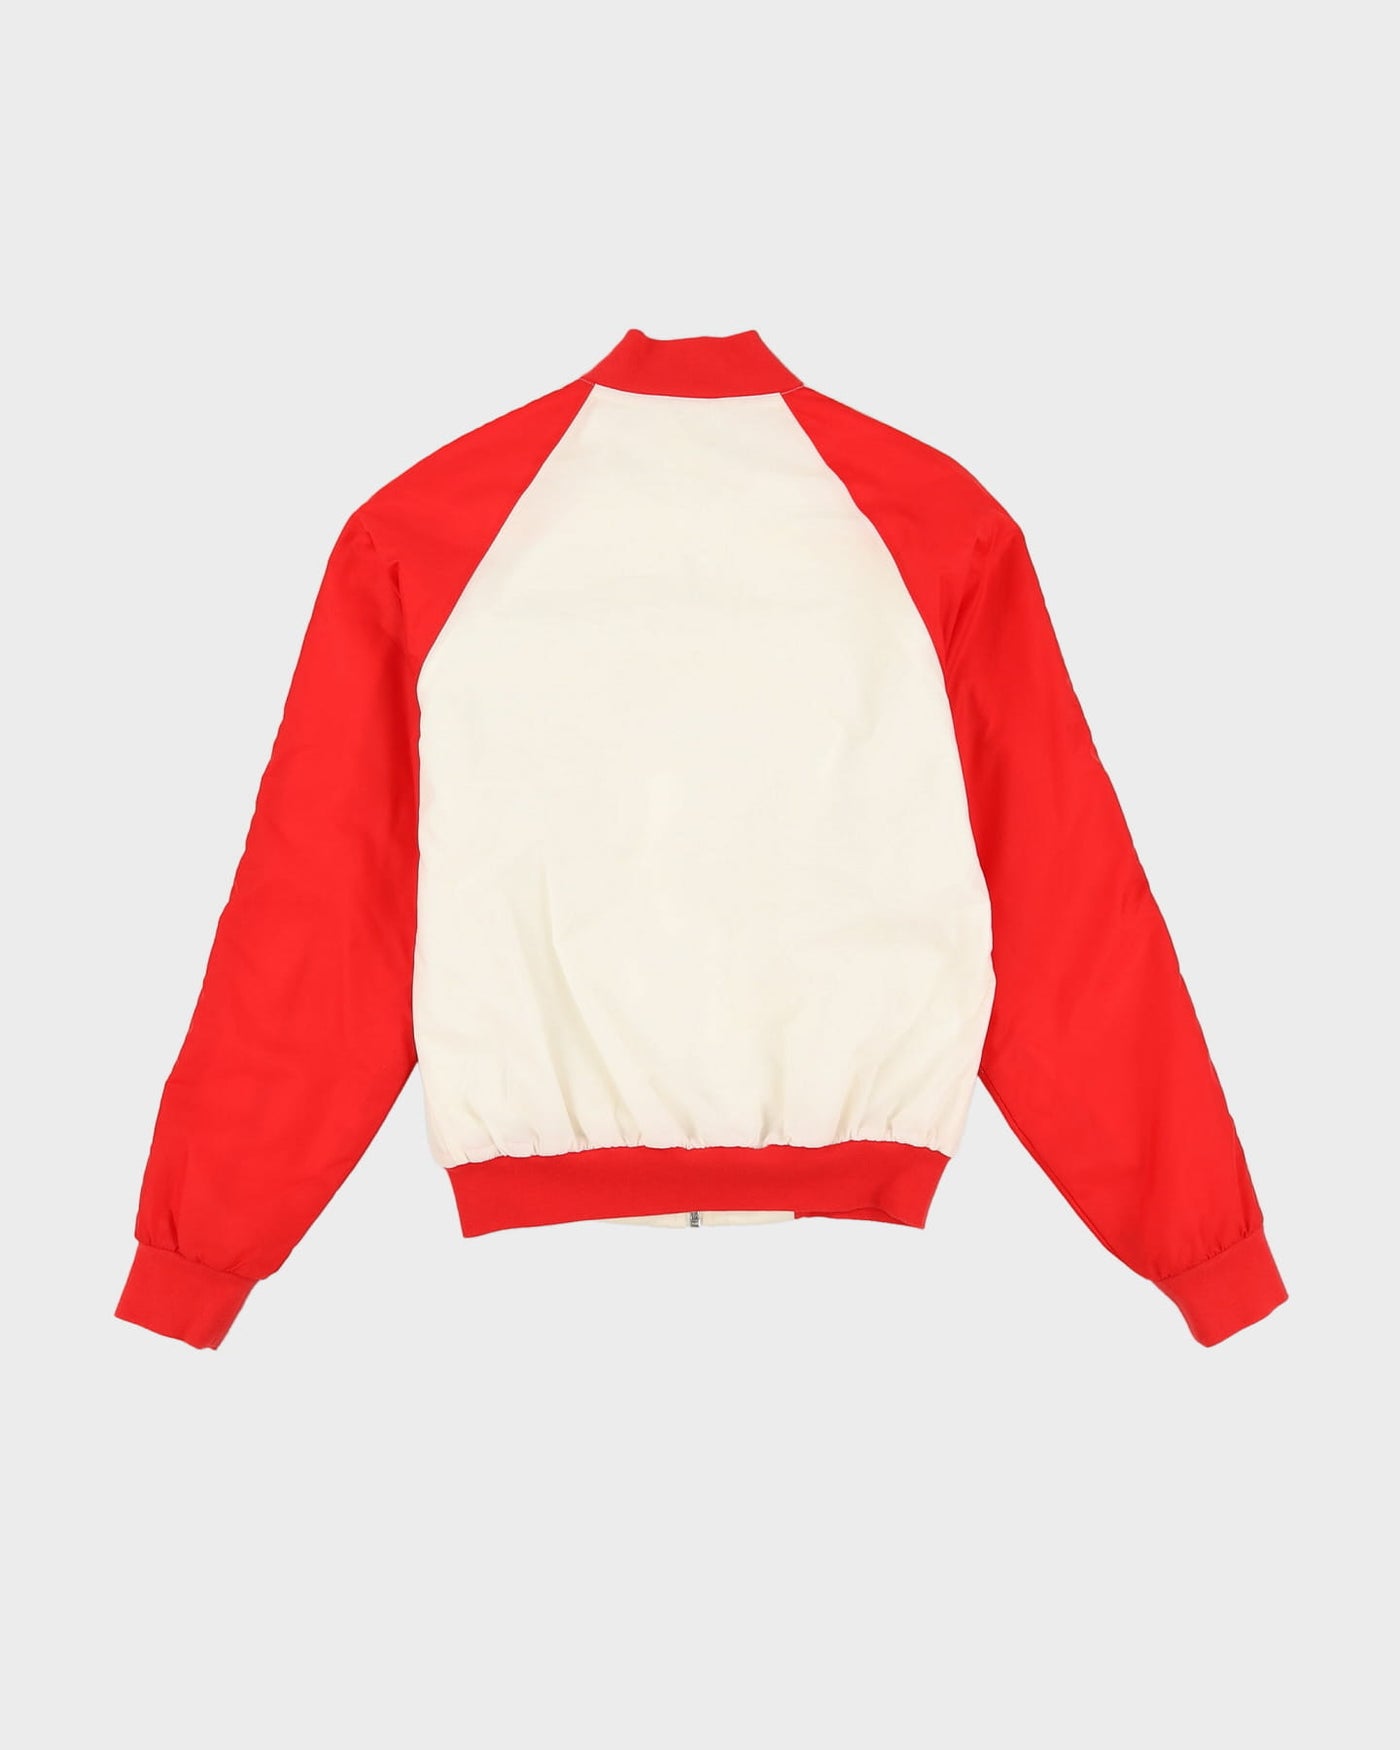 00s Adidas Red / White Track Jacket - S